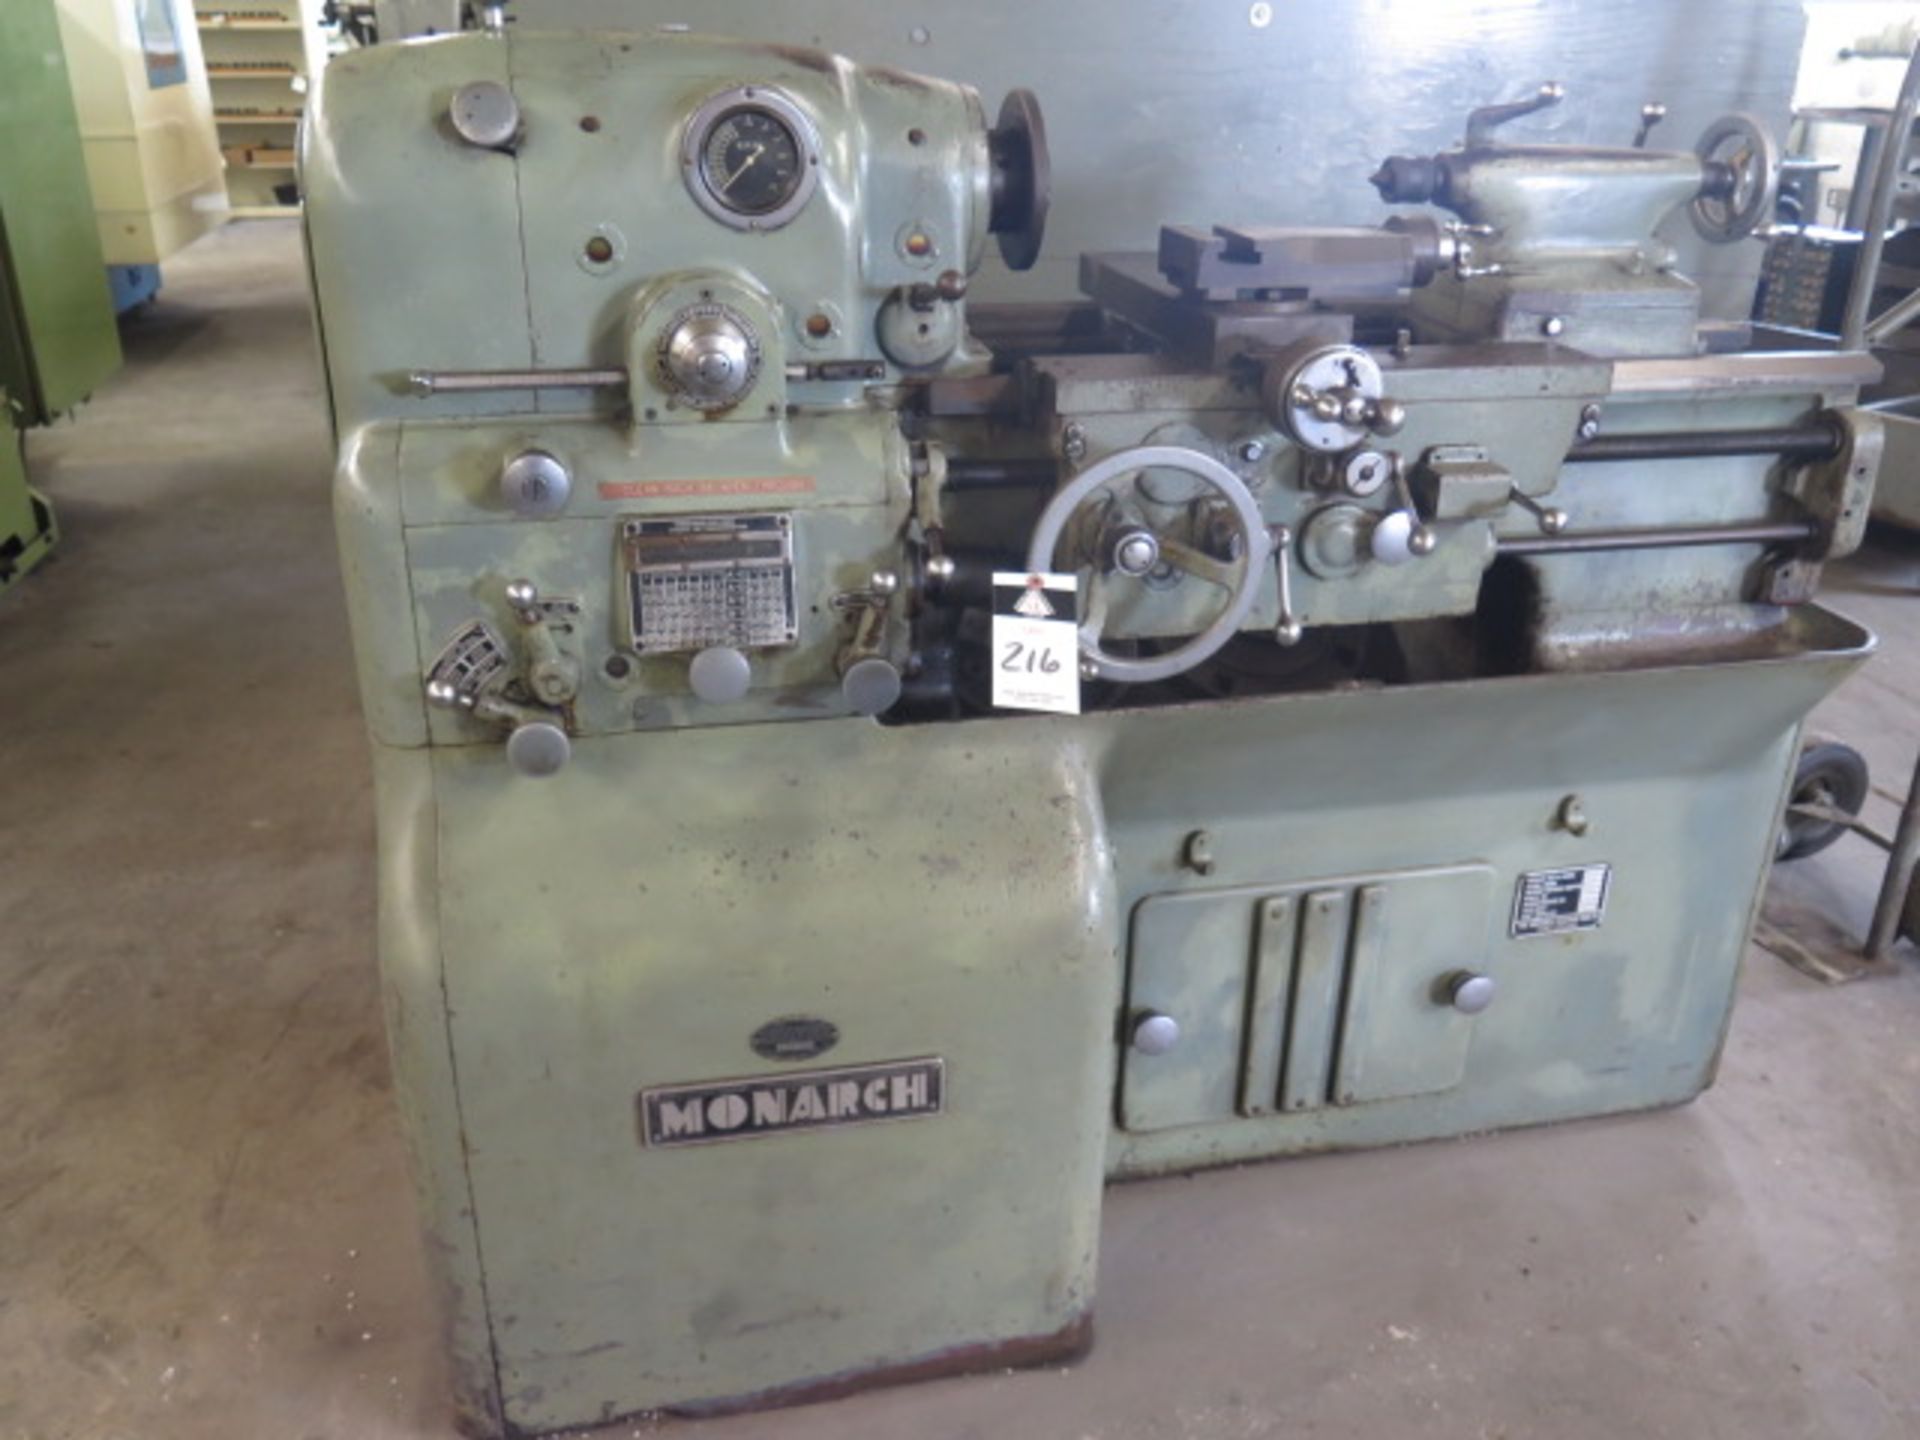 Monarch mdl. 10EE 12 ½” x 20” Tool Room Lathe s/n 28905 w/ 2500 Max RPM, Dial RPM Gage, Inch - Image 2 of 9